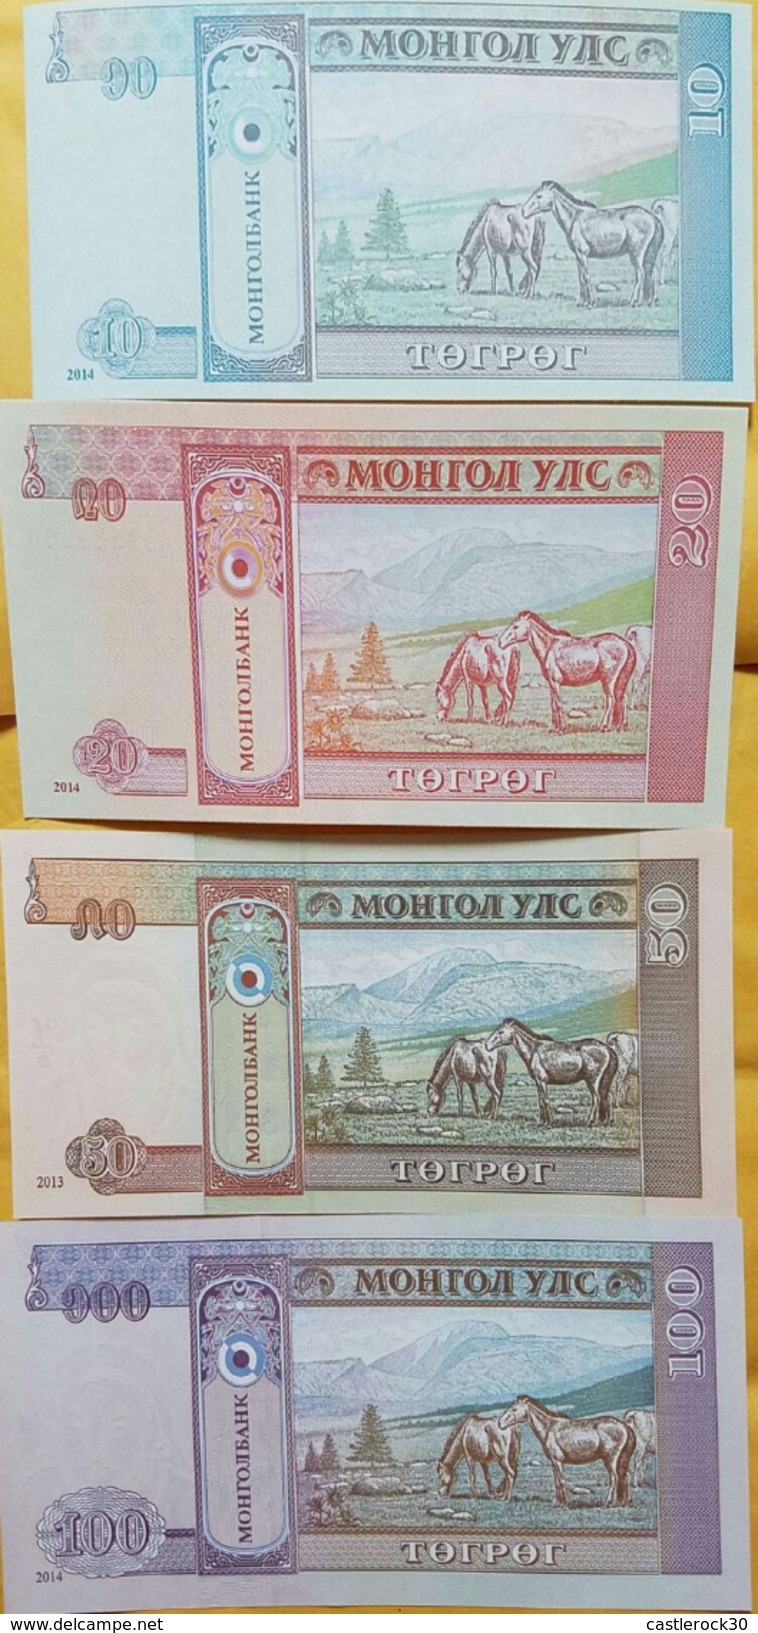 O) 2013  2014 MONGOLIA, BANKNOTE, PAPER MONEY, COMPLETE SERIES, MNT-TUGRIK TUG -UUNC, EVOLUTIONARY FOUNDER OF INDEPENDEN - Mongolia